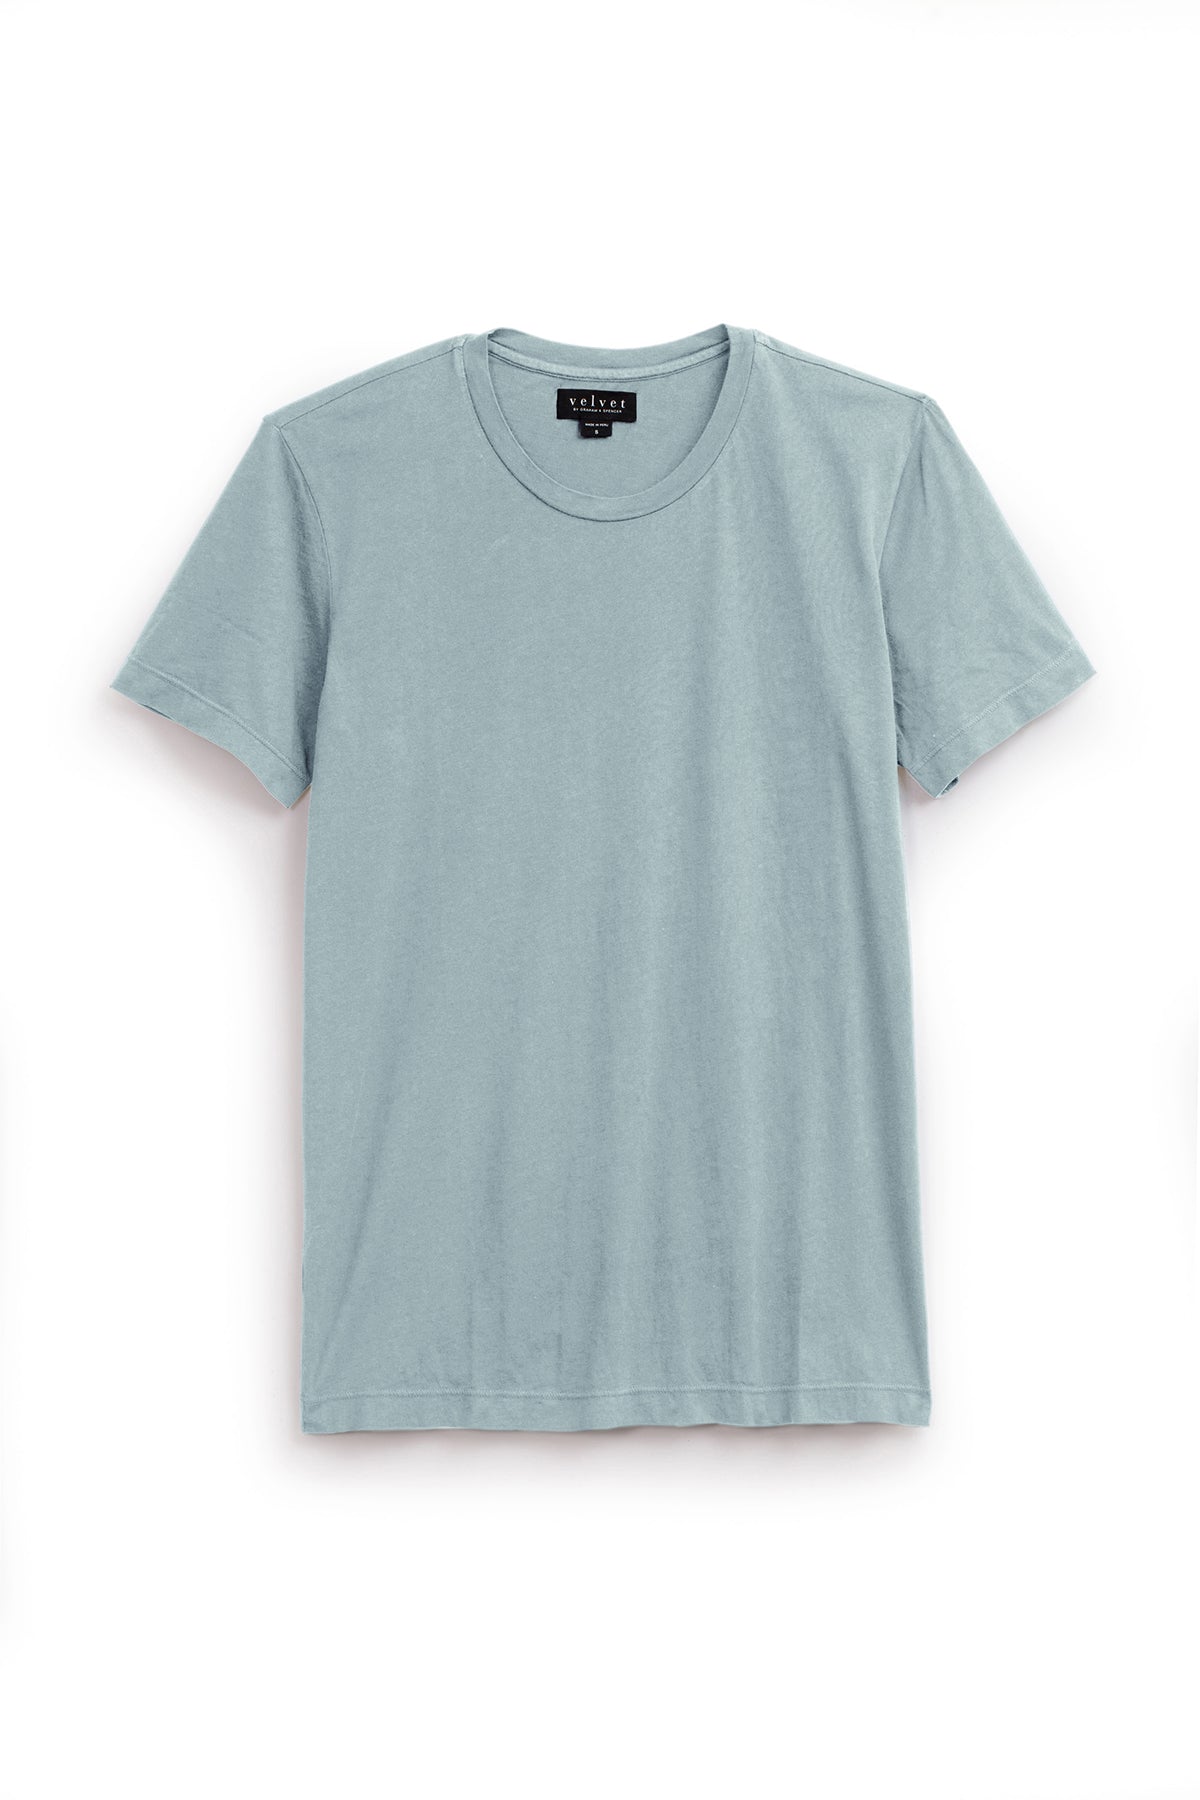 A HOWARD WHISPER CLASSIC CREW NECK TEE in light blue, with a vintage-feel softness, displayed on a white background.-35782849298625